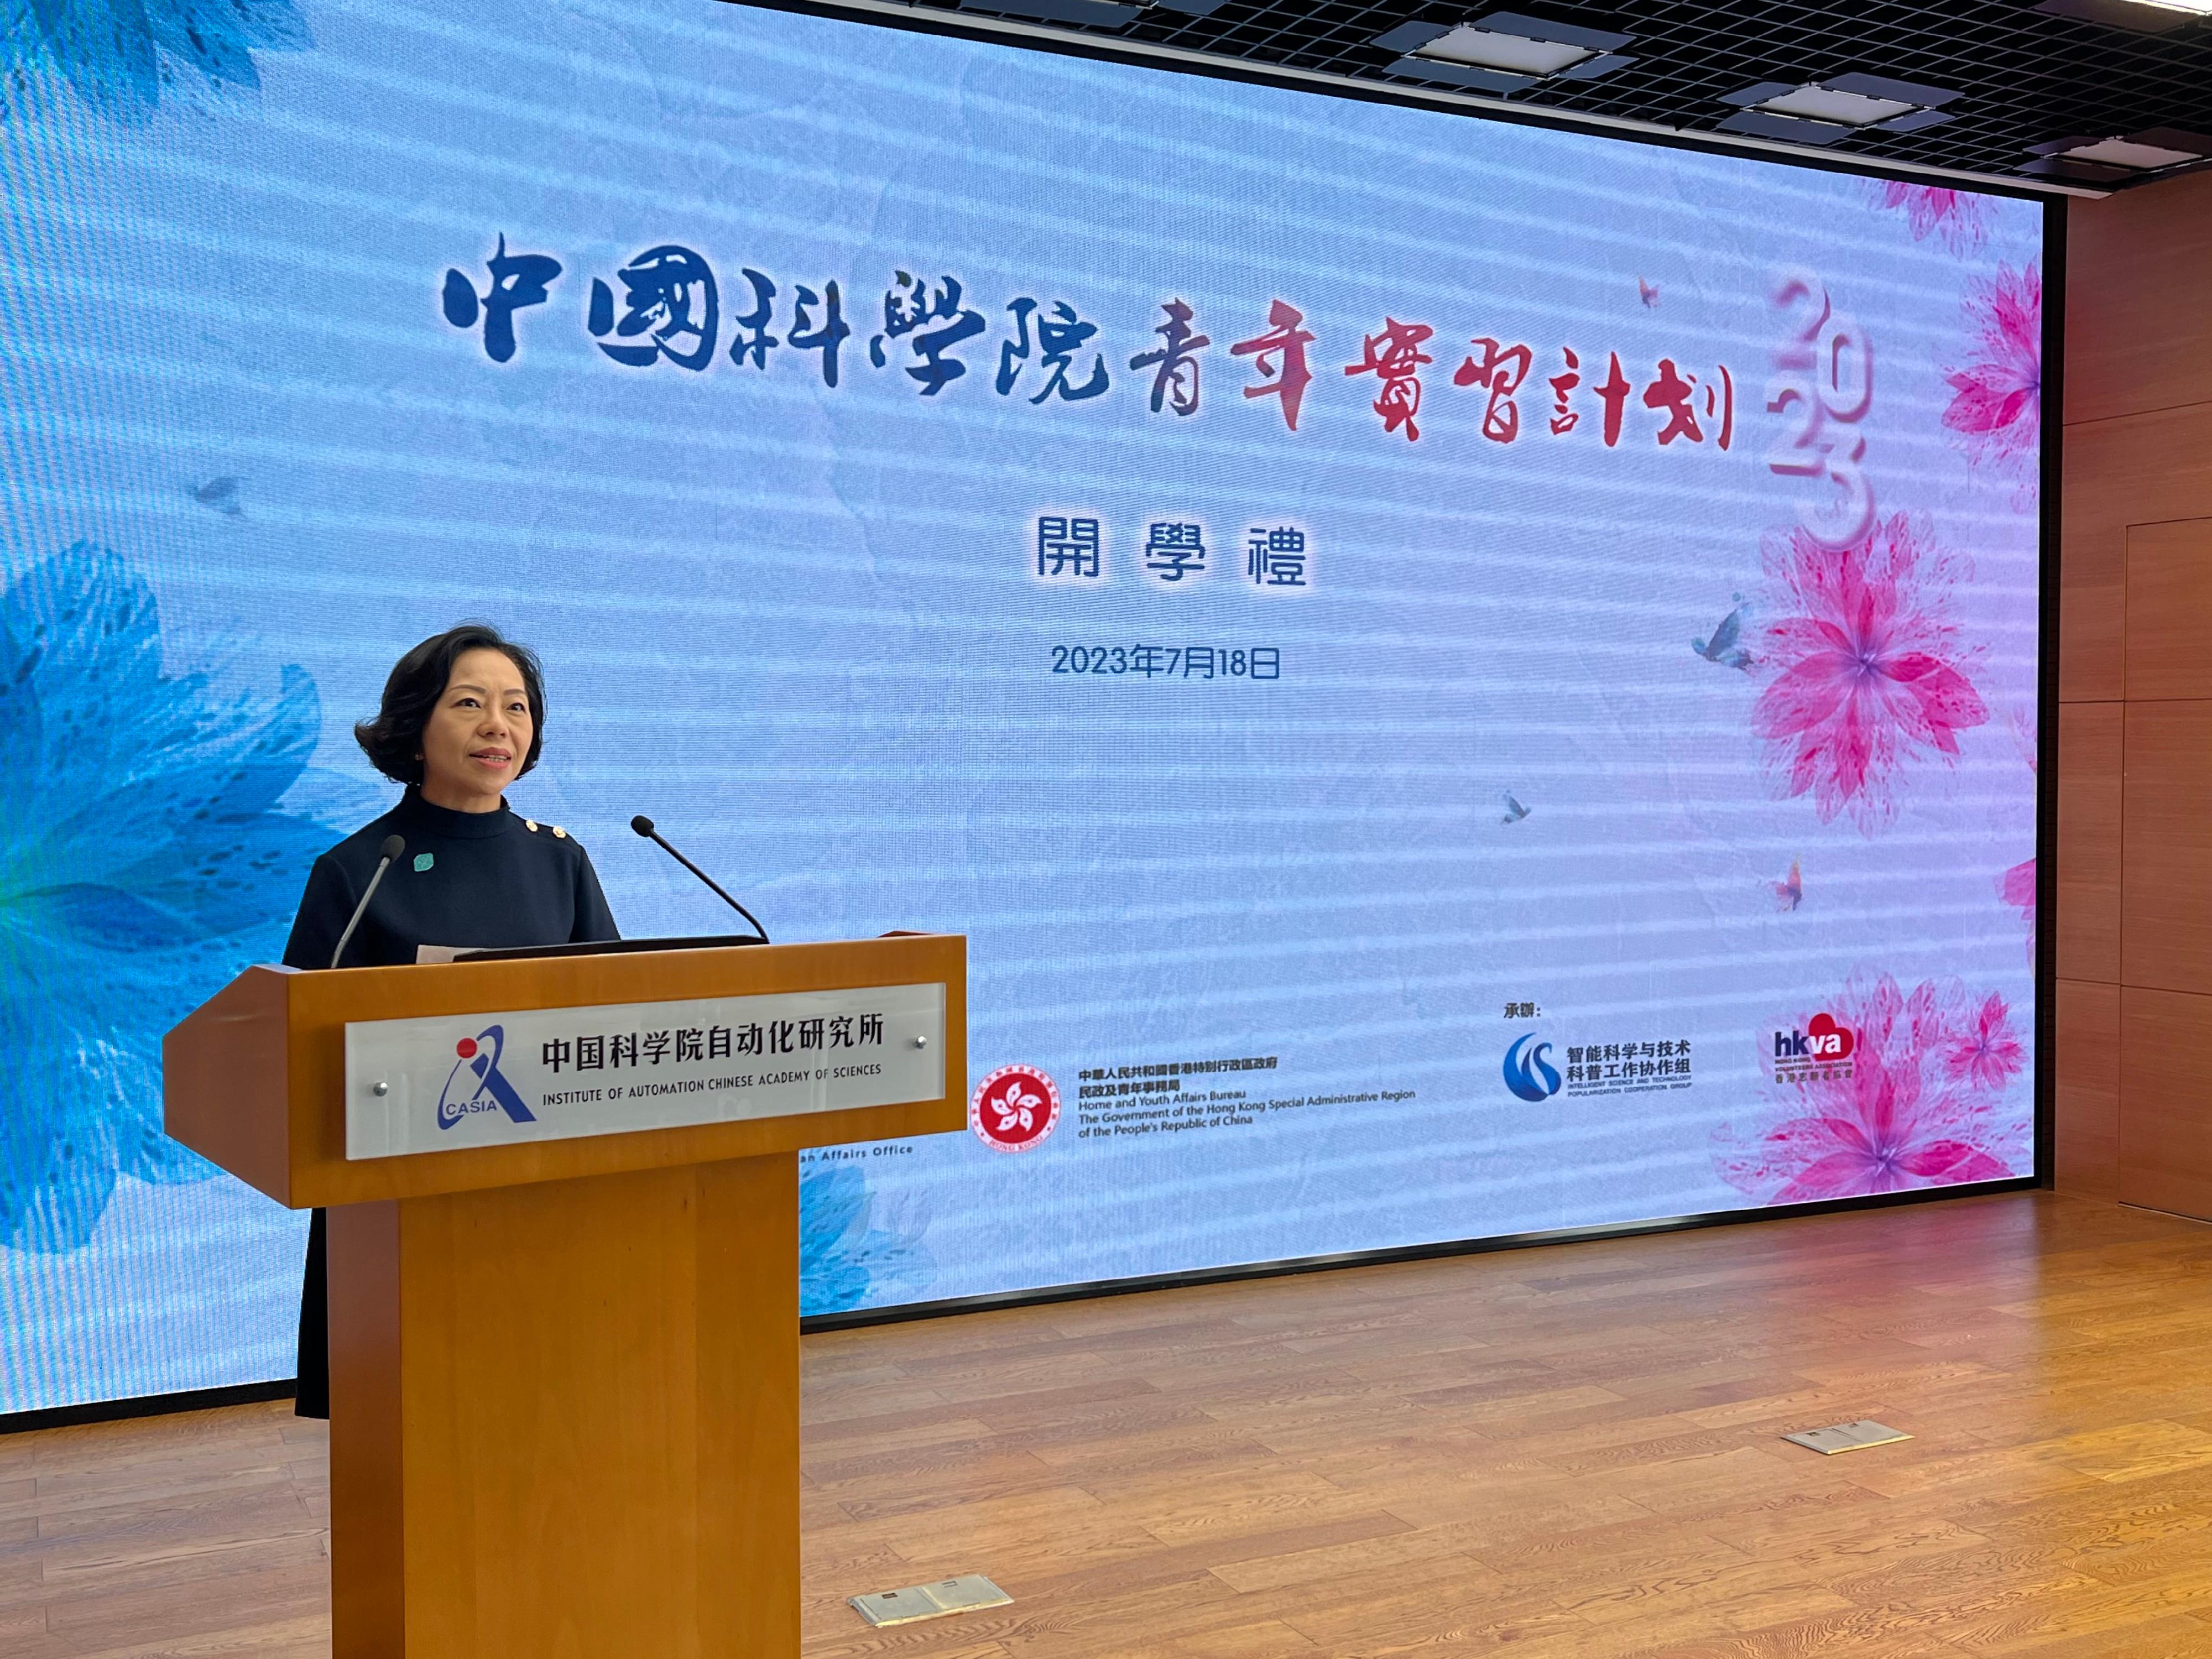 The Secretary for Home and Youth Affairs, Miss Alice Mak, continued her visit in Beijing today (July 18) and attended the inauguration ceremony of the Youth Internship Programme at Chinese Academy of Sciences. Photo shows Miss Mak delivering a speech at the inauguration ceremony.
